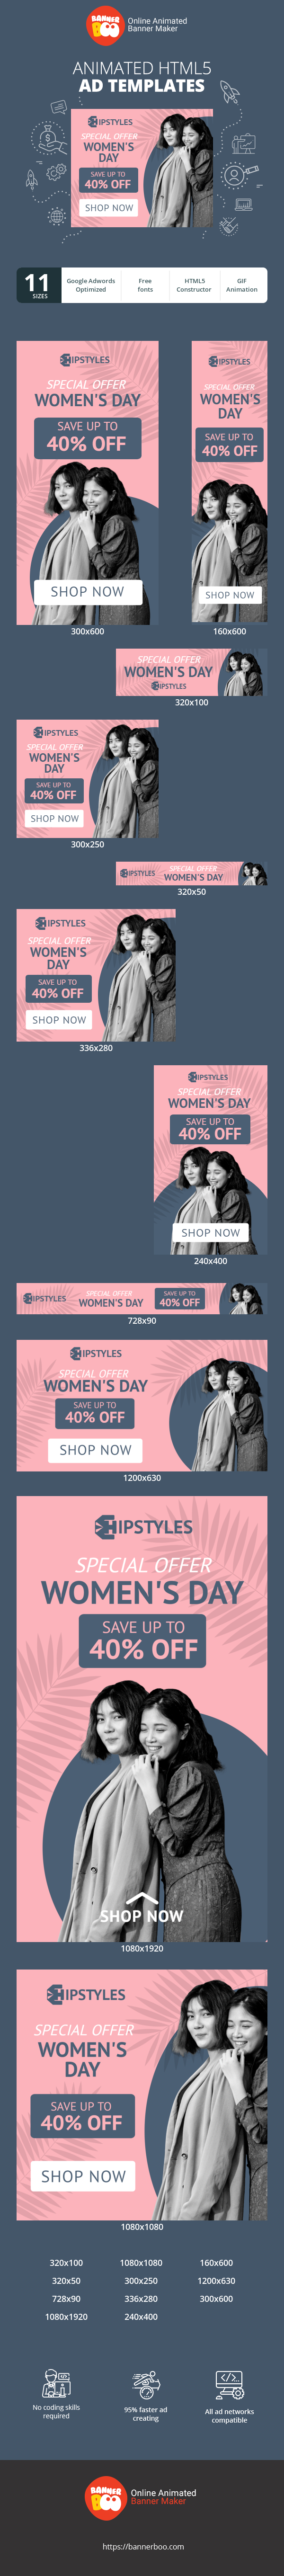 Szablon reklamy banerowej — Womens Day — Special Offer Save Up To 40% Off